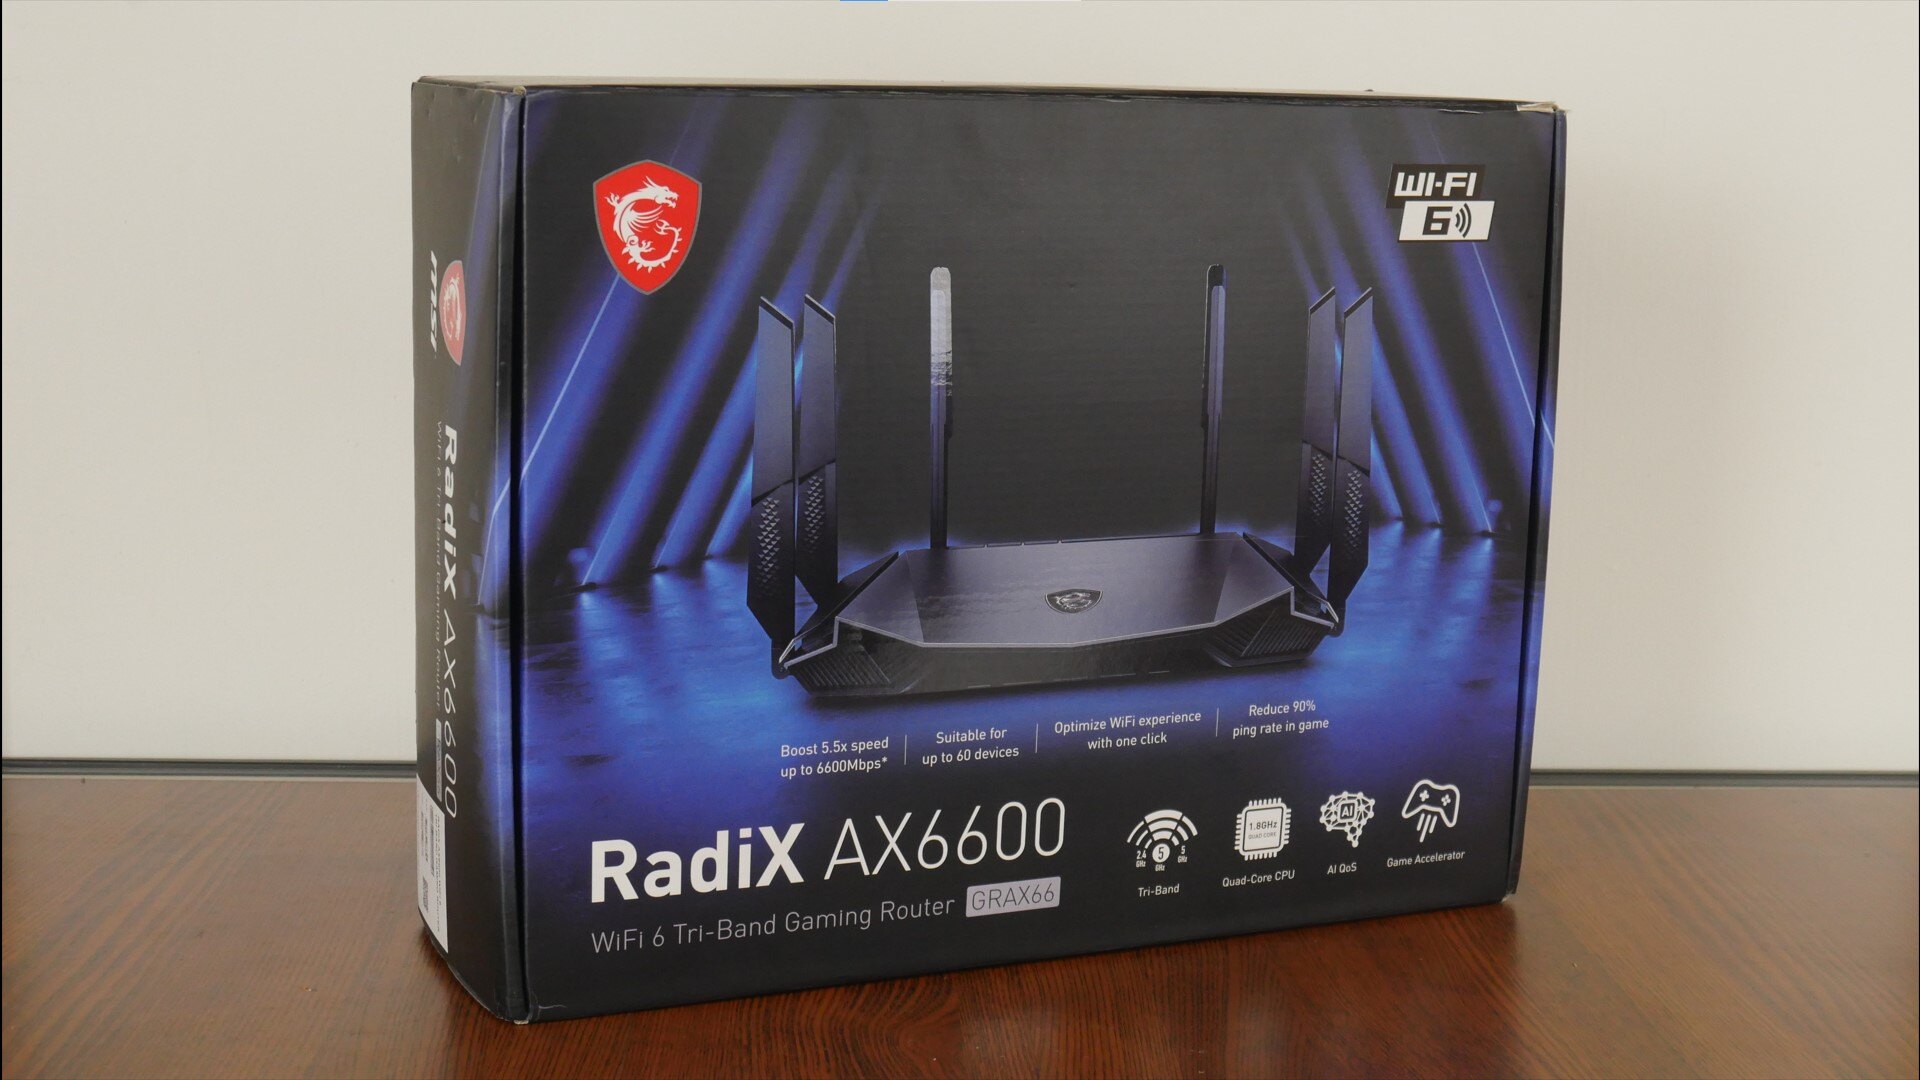 MSI RadiX AX6600 Packaging (Front)